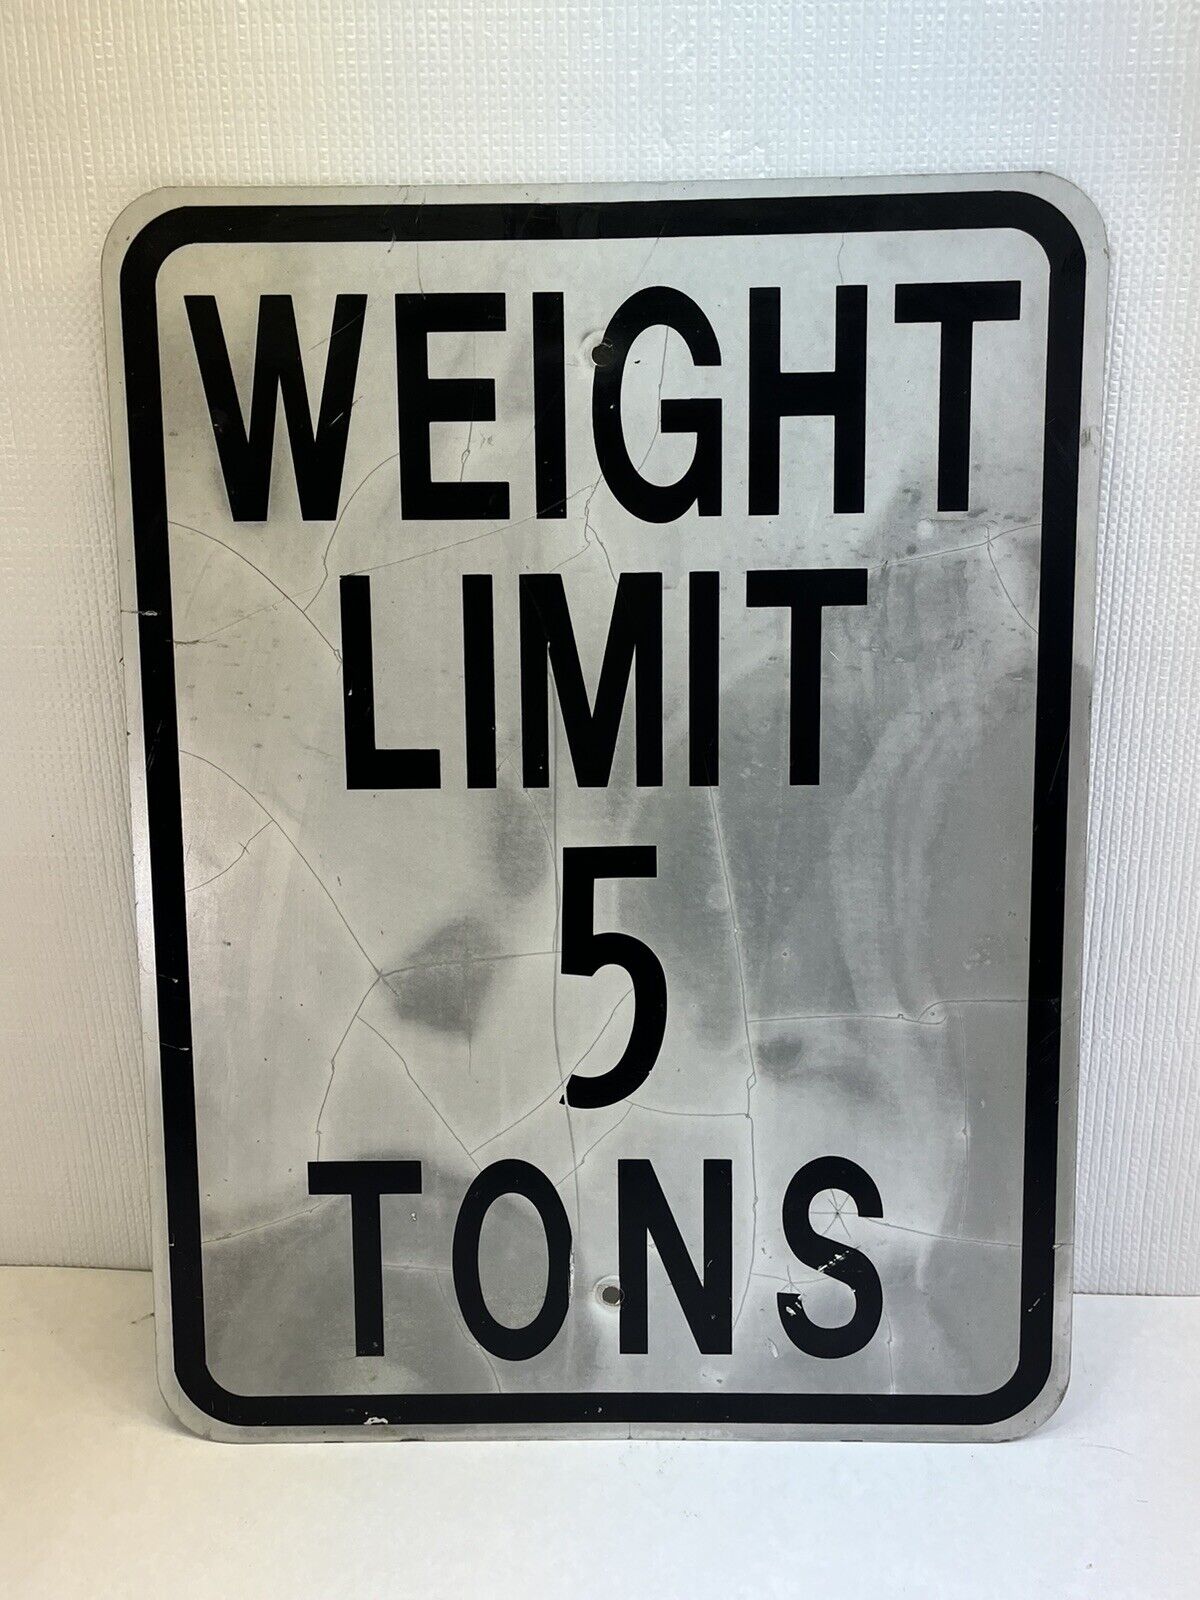 Authentic ‘WEIGHT LIMIT 5 TONS’ Metal Sign Road Street Traffic 24 X 18”